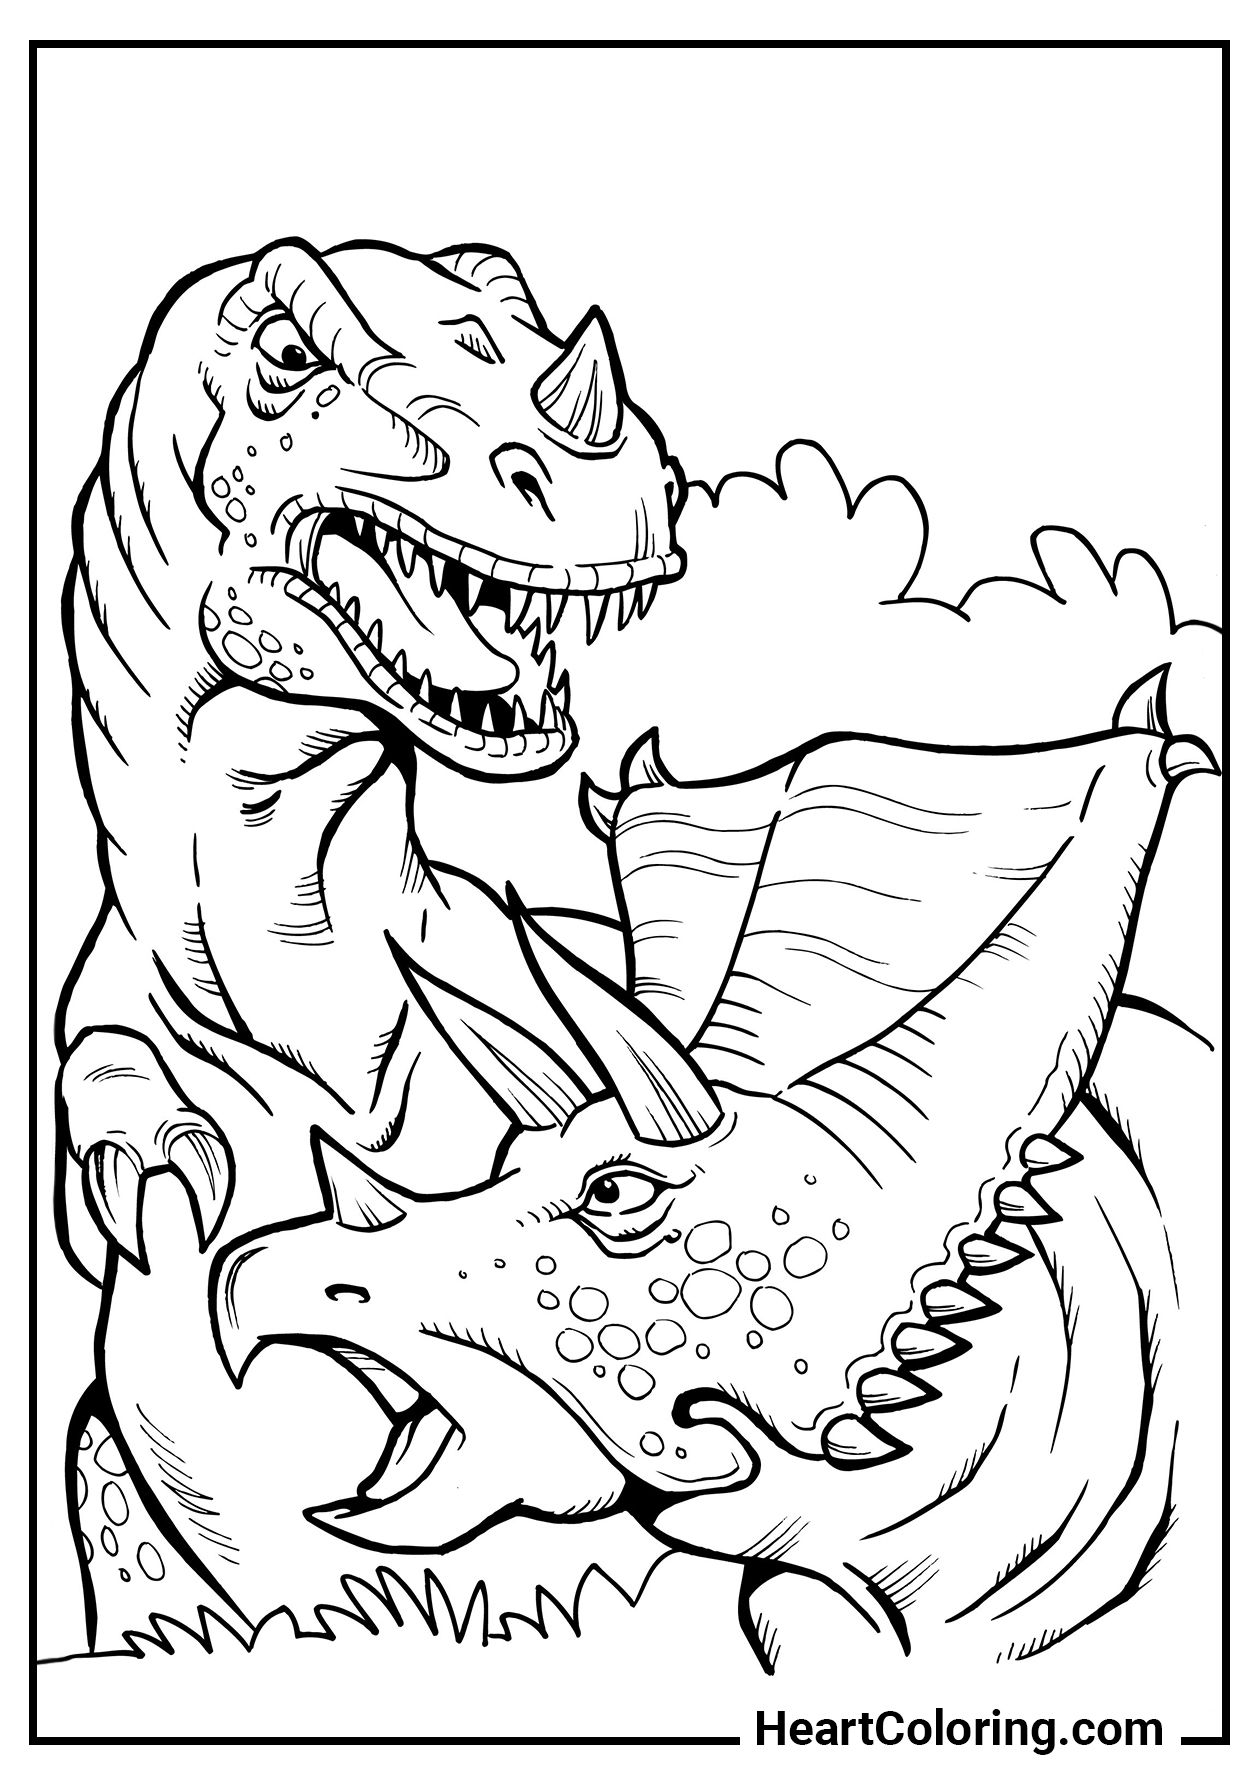 Dinosaur Coloring Pages for Kids to Print for Free